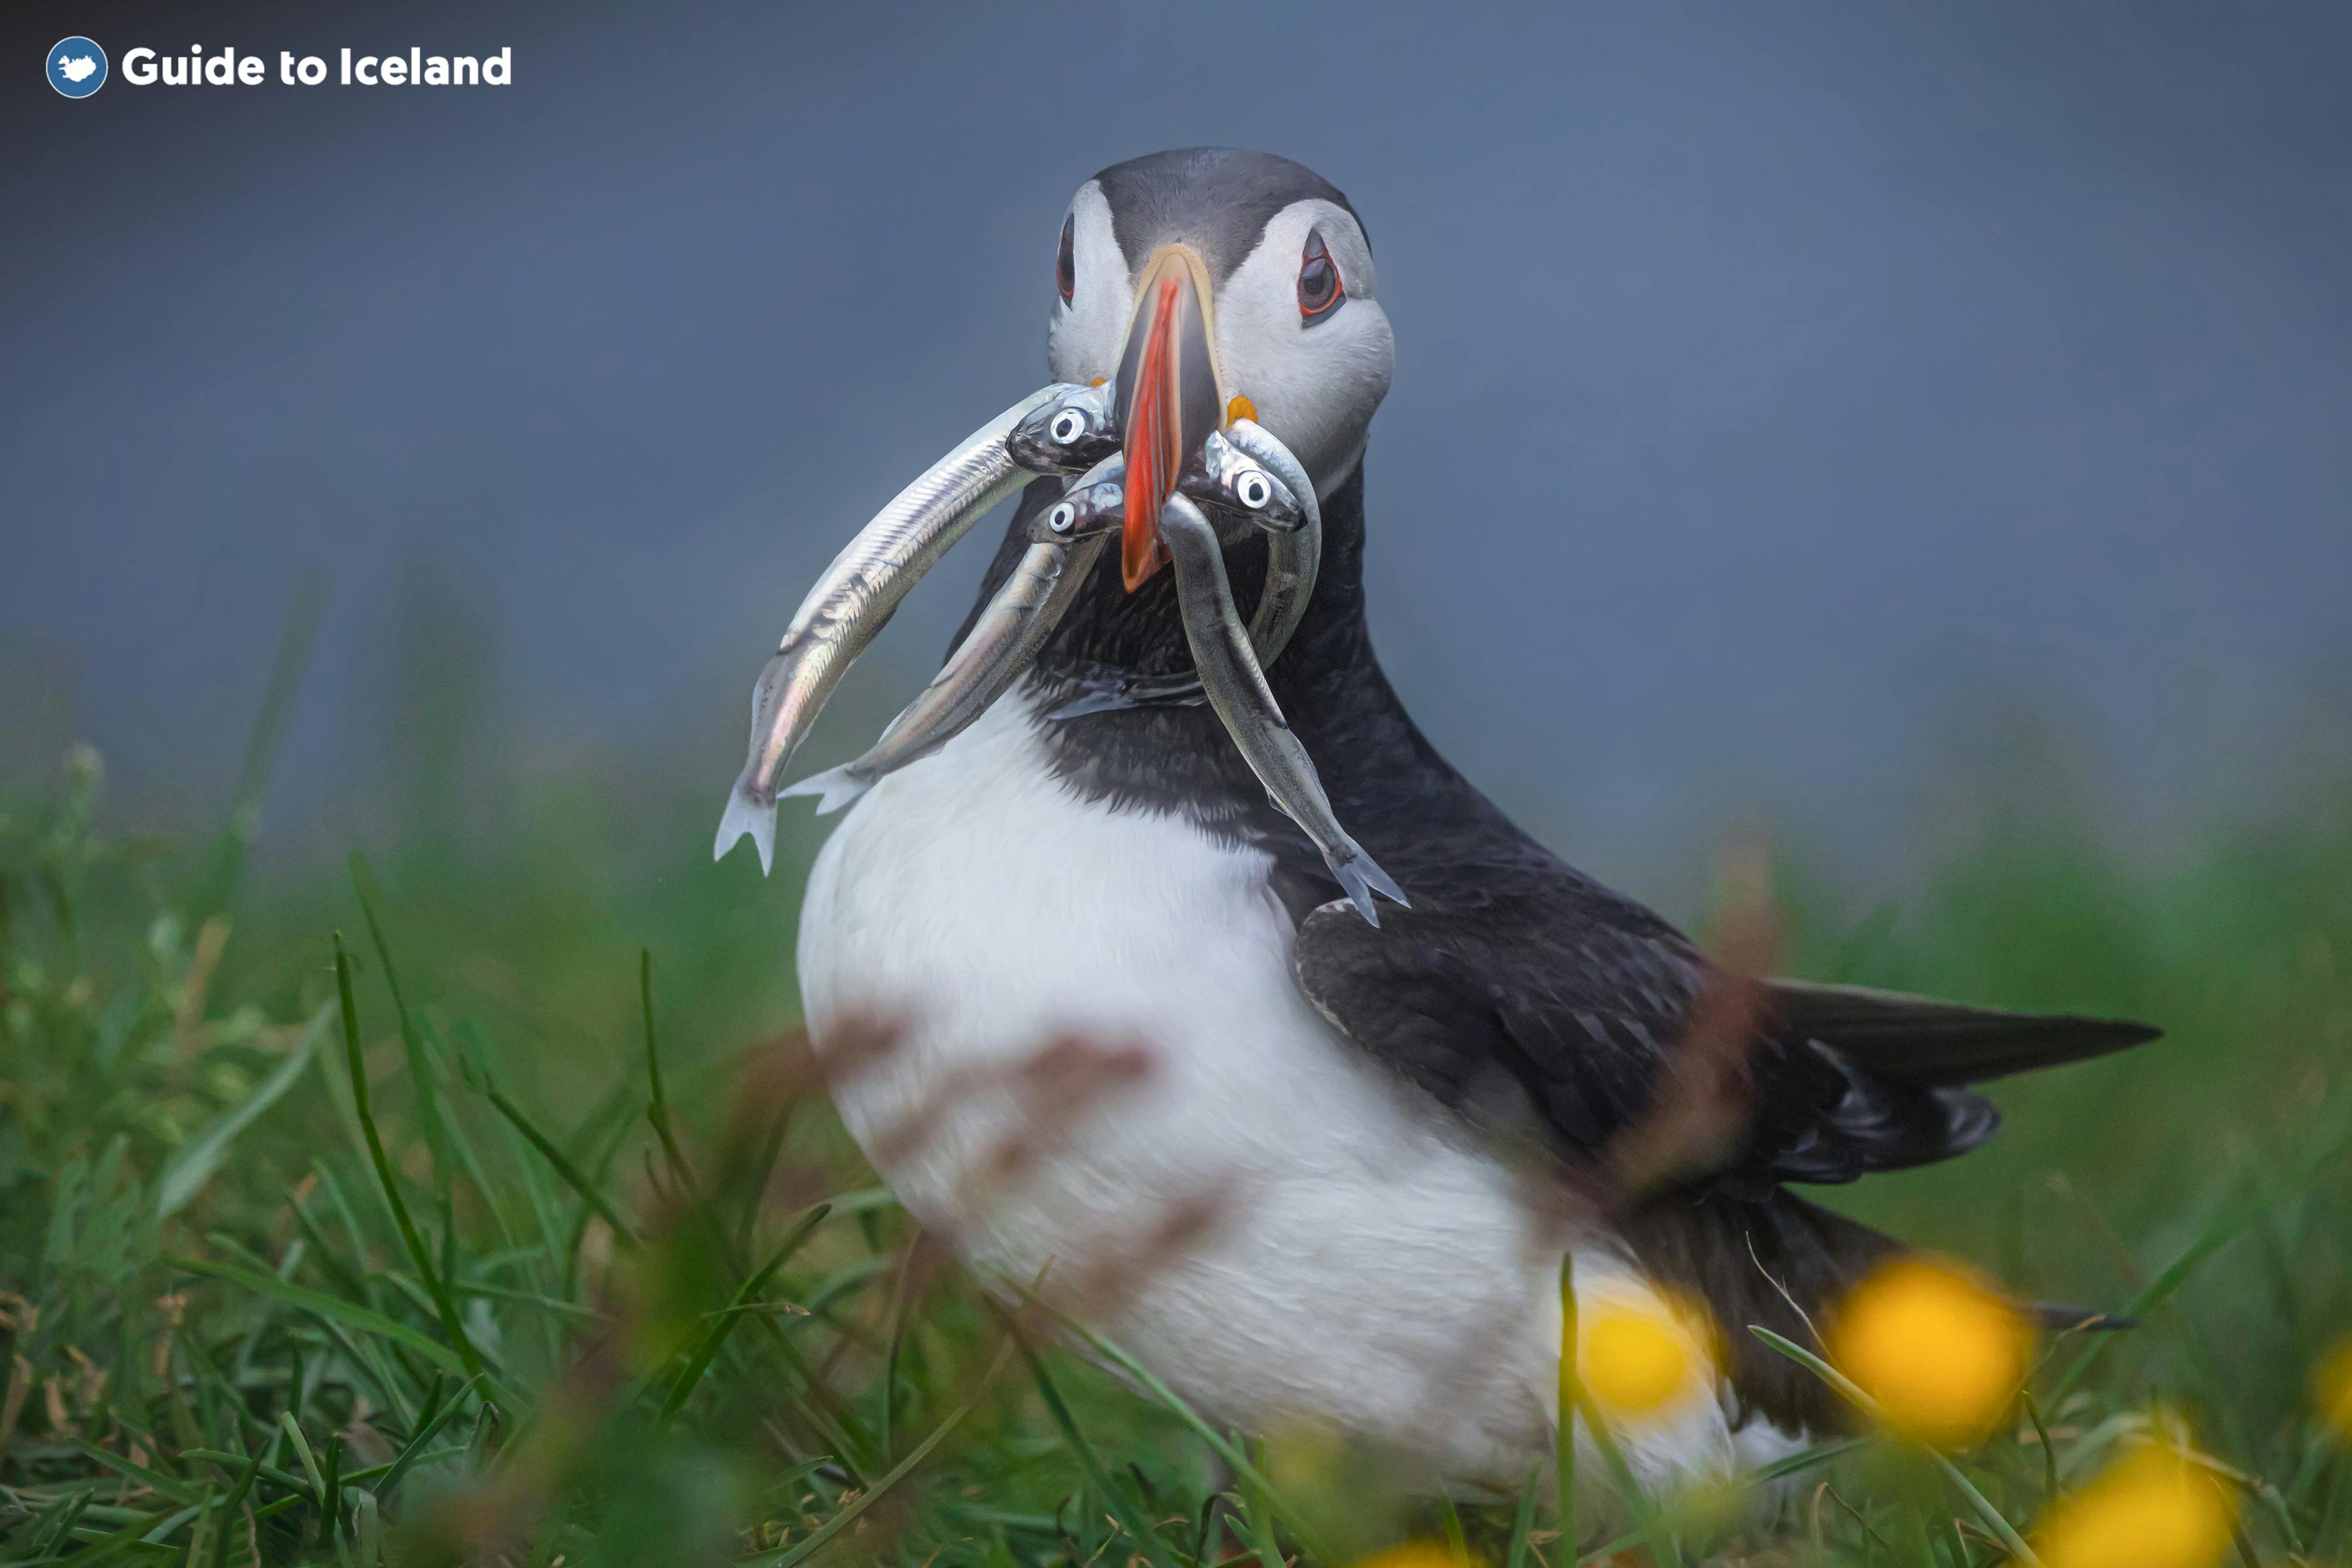 The tranquil Flatey island in West Iceland is home to puffins.